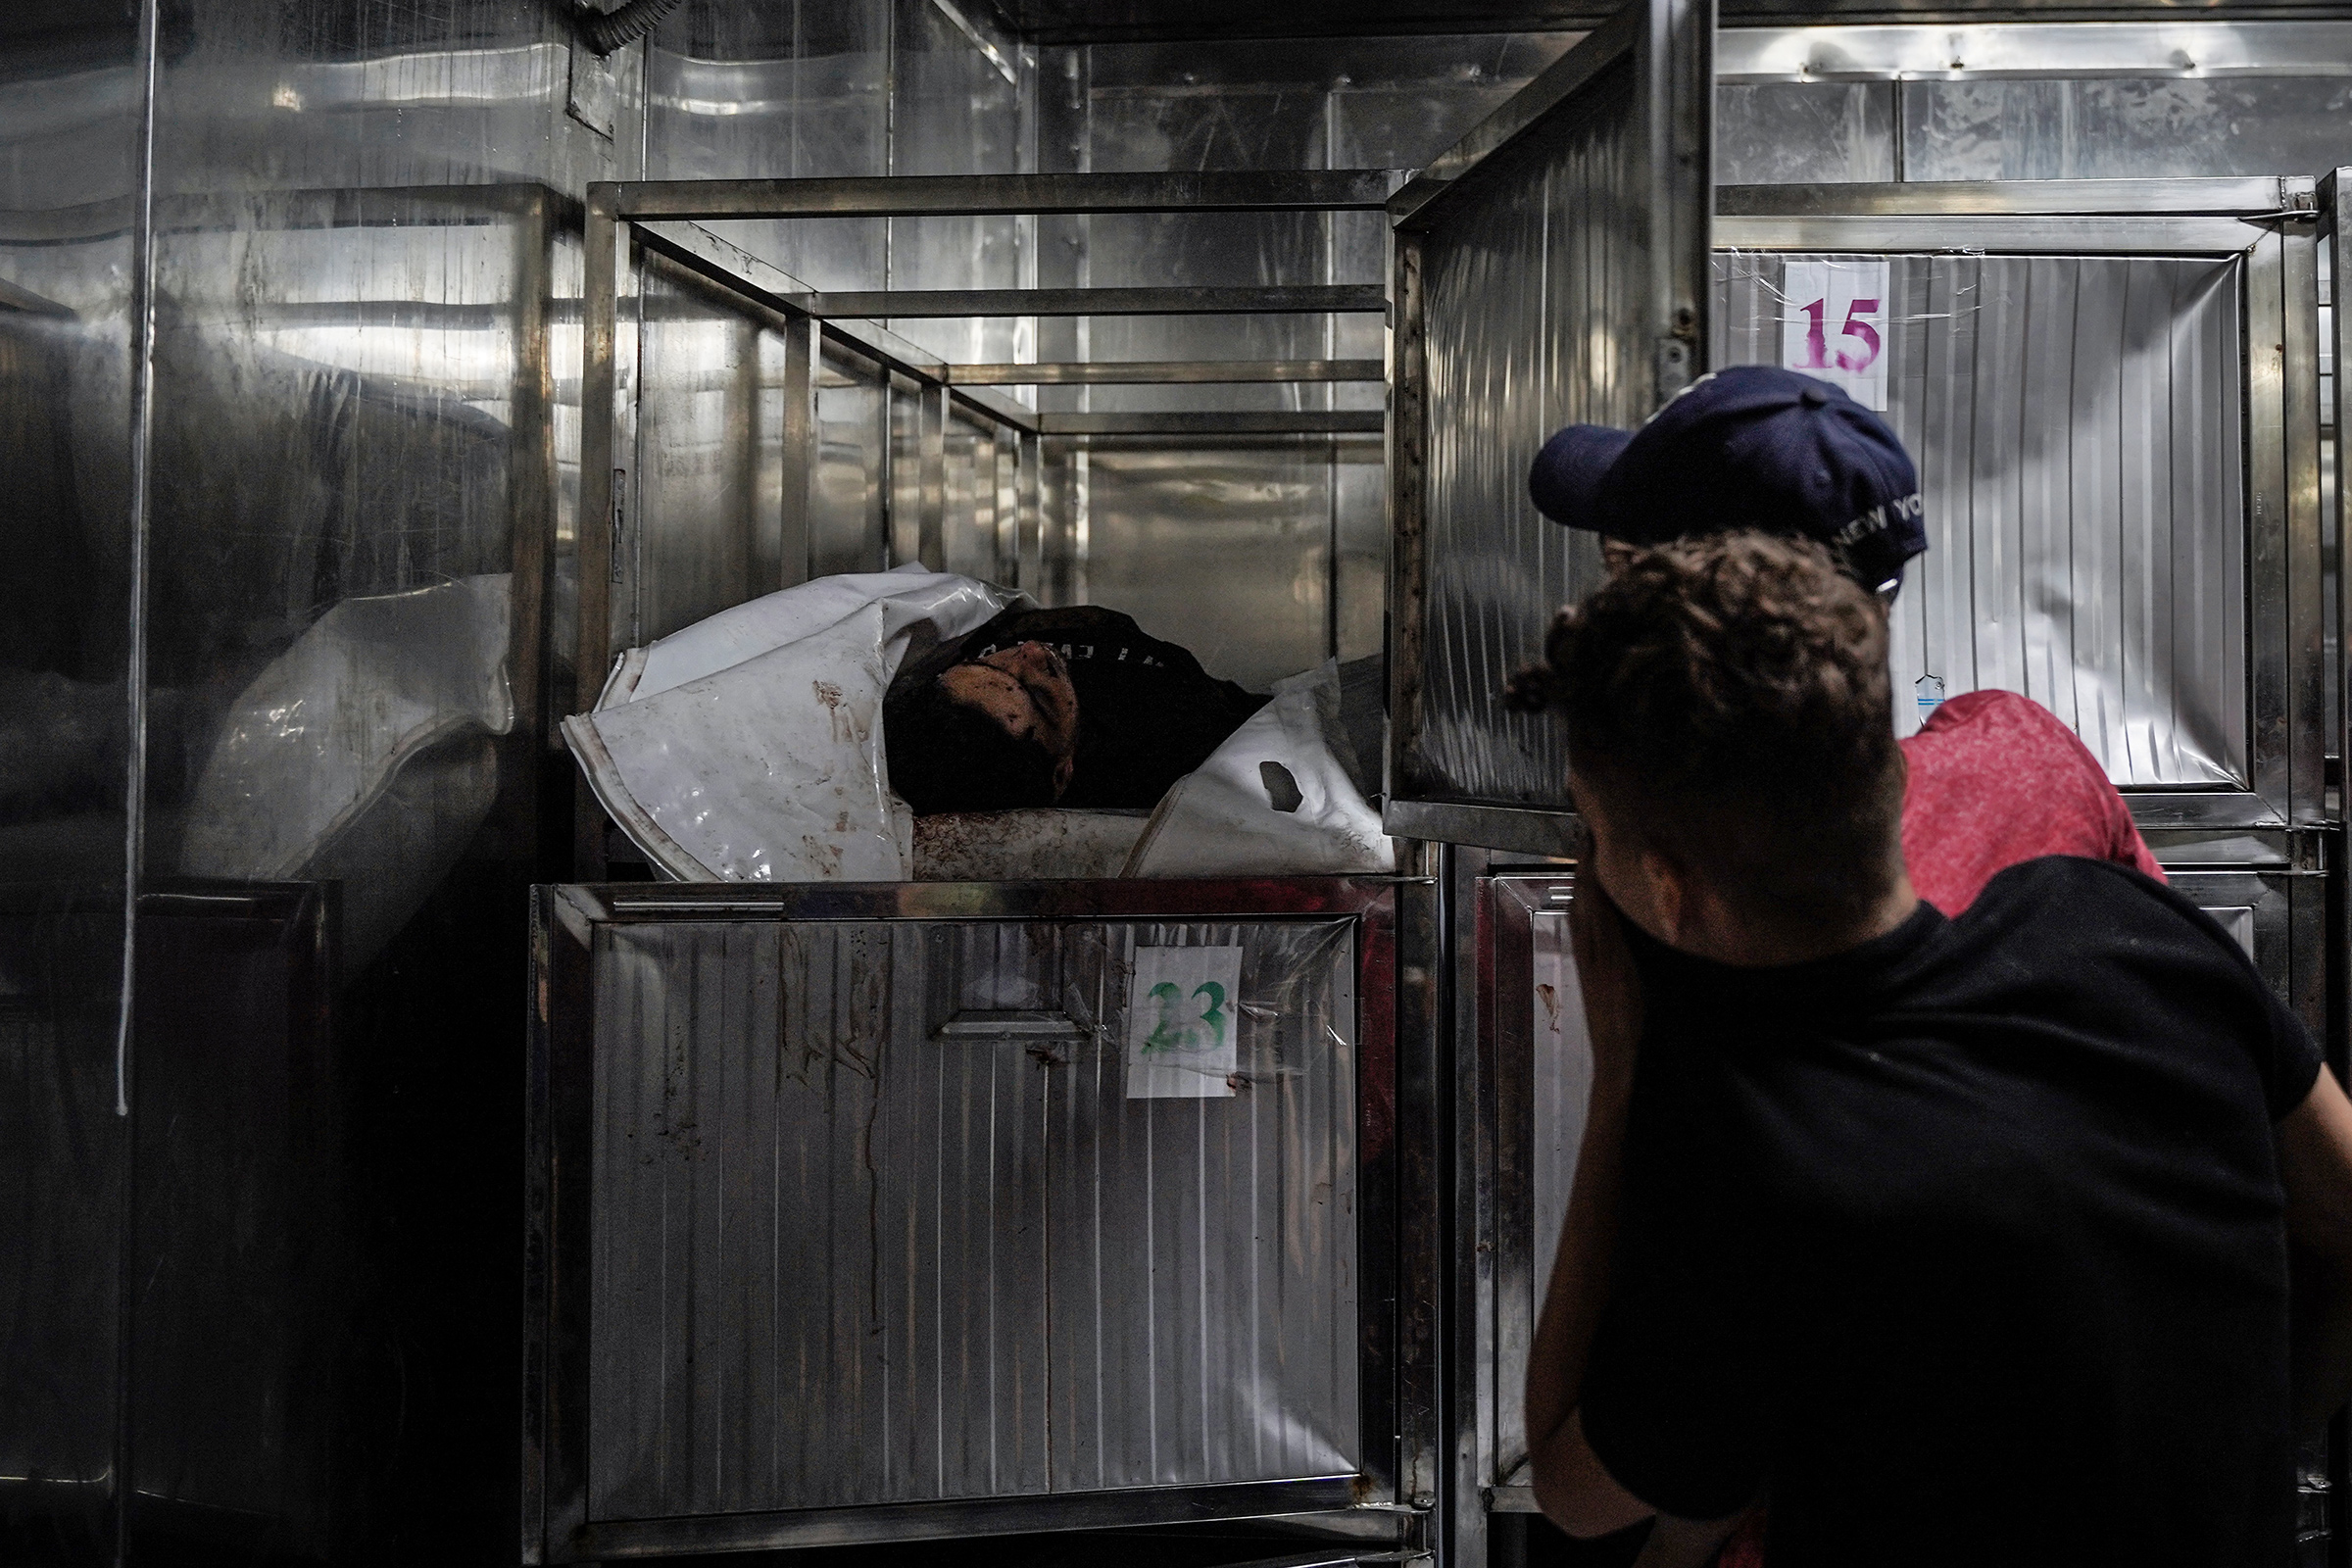 Two Palestinian teenagers look sadly at their relative while he is inside mortuary refrigerators, Oct. 9.